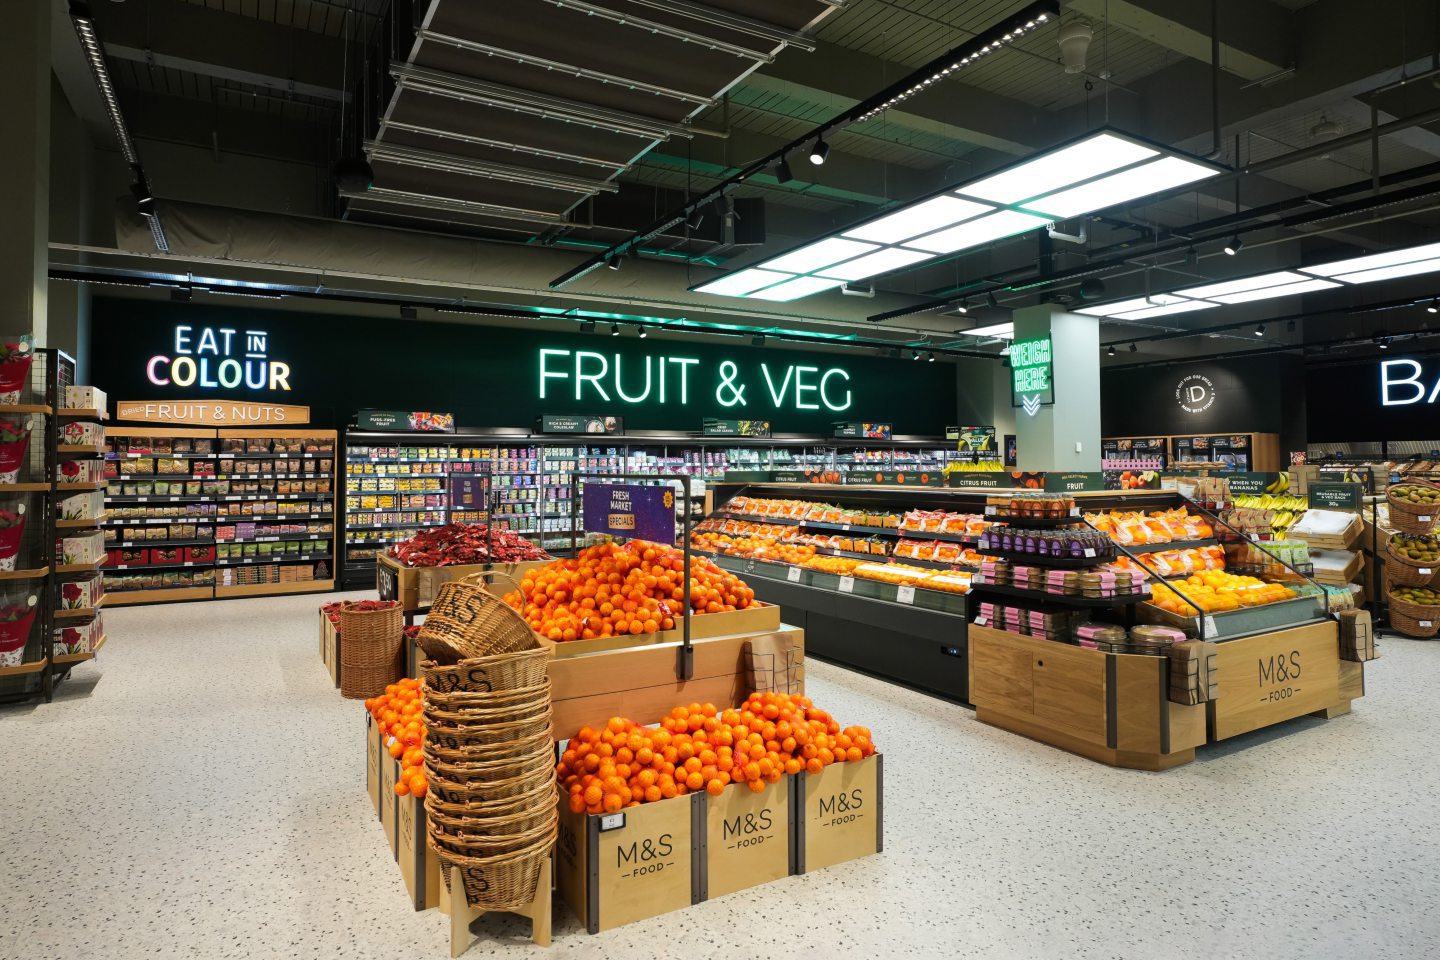 The fruit and veg section